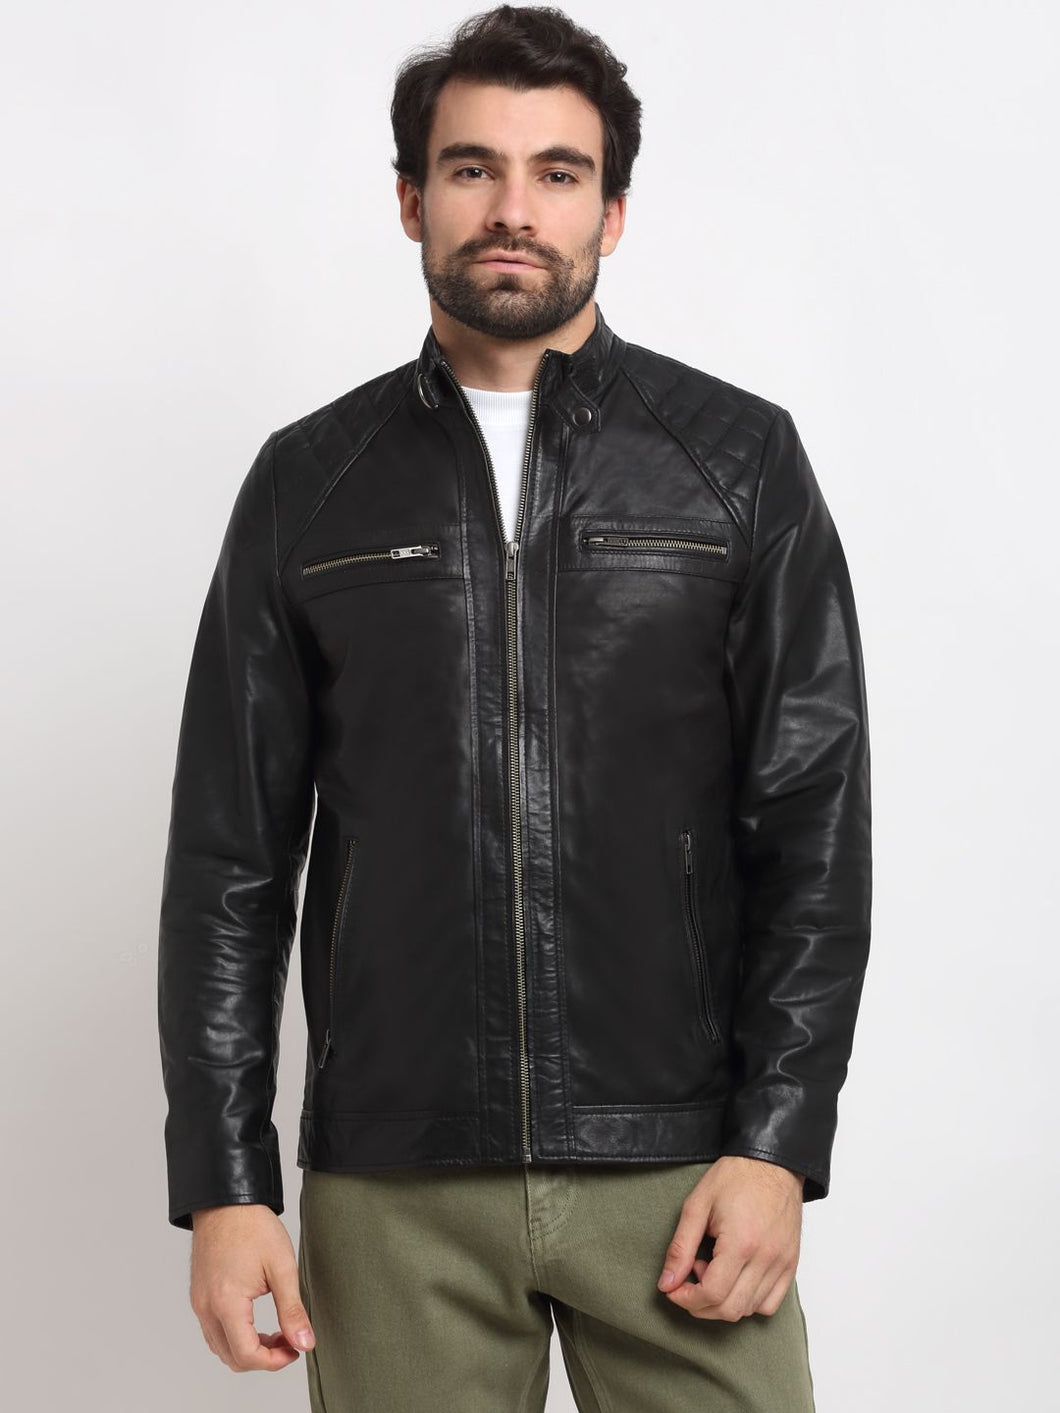 David Leather Jacket #1 : LeatherCult: Genuine Custom Leather Products,  Jackets for Men & Women